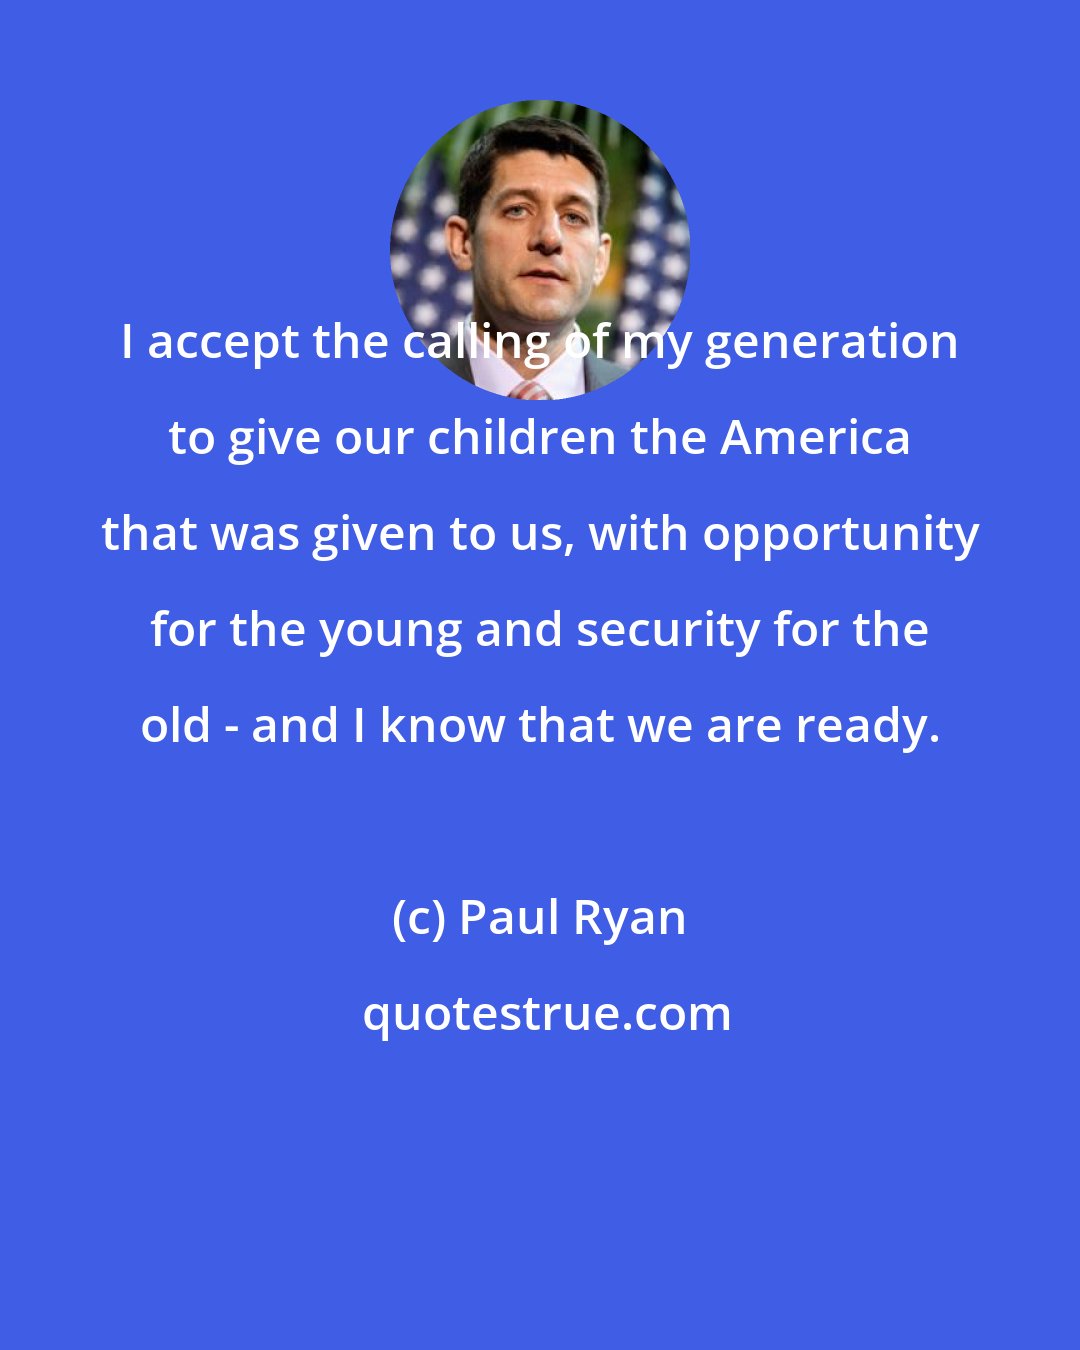 Paul Ryan: I accept the calling of my generation to give our children the America that was given to us, with opportunity for the young and security for the old - and I know that we are ready.